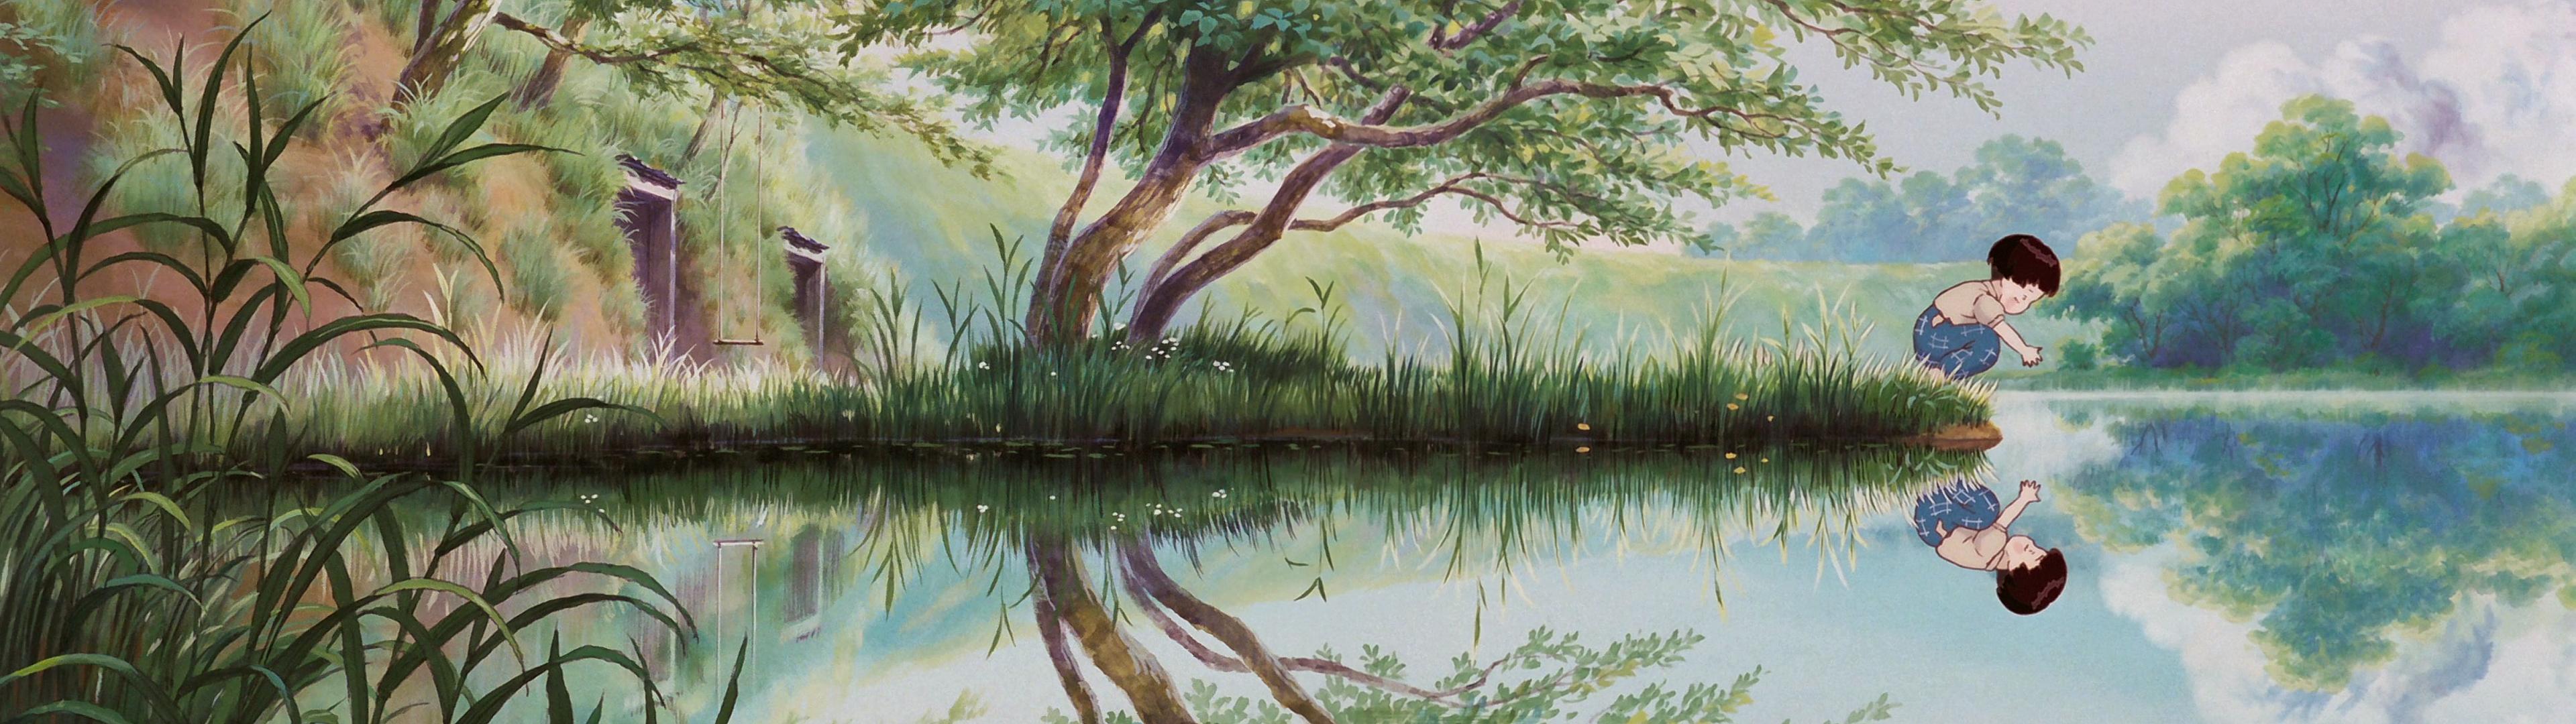 Anime Grave Of The Fireflies 3840x1080